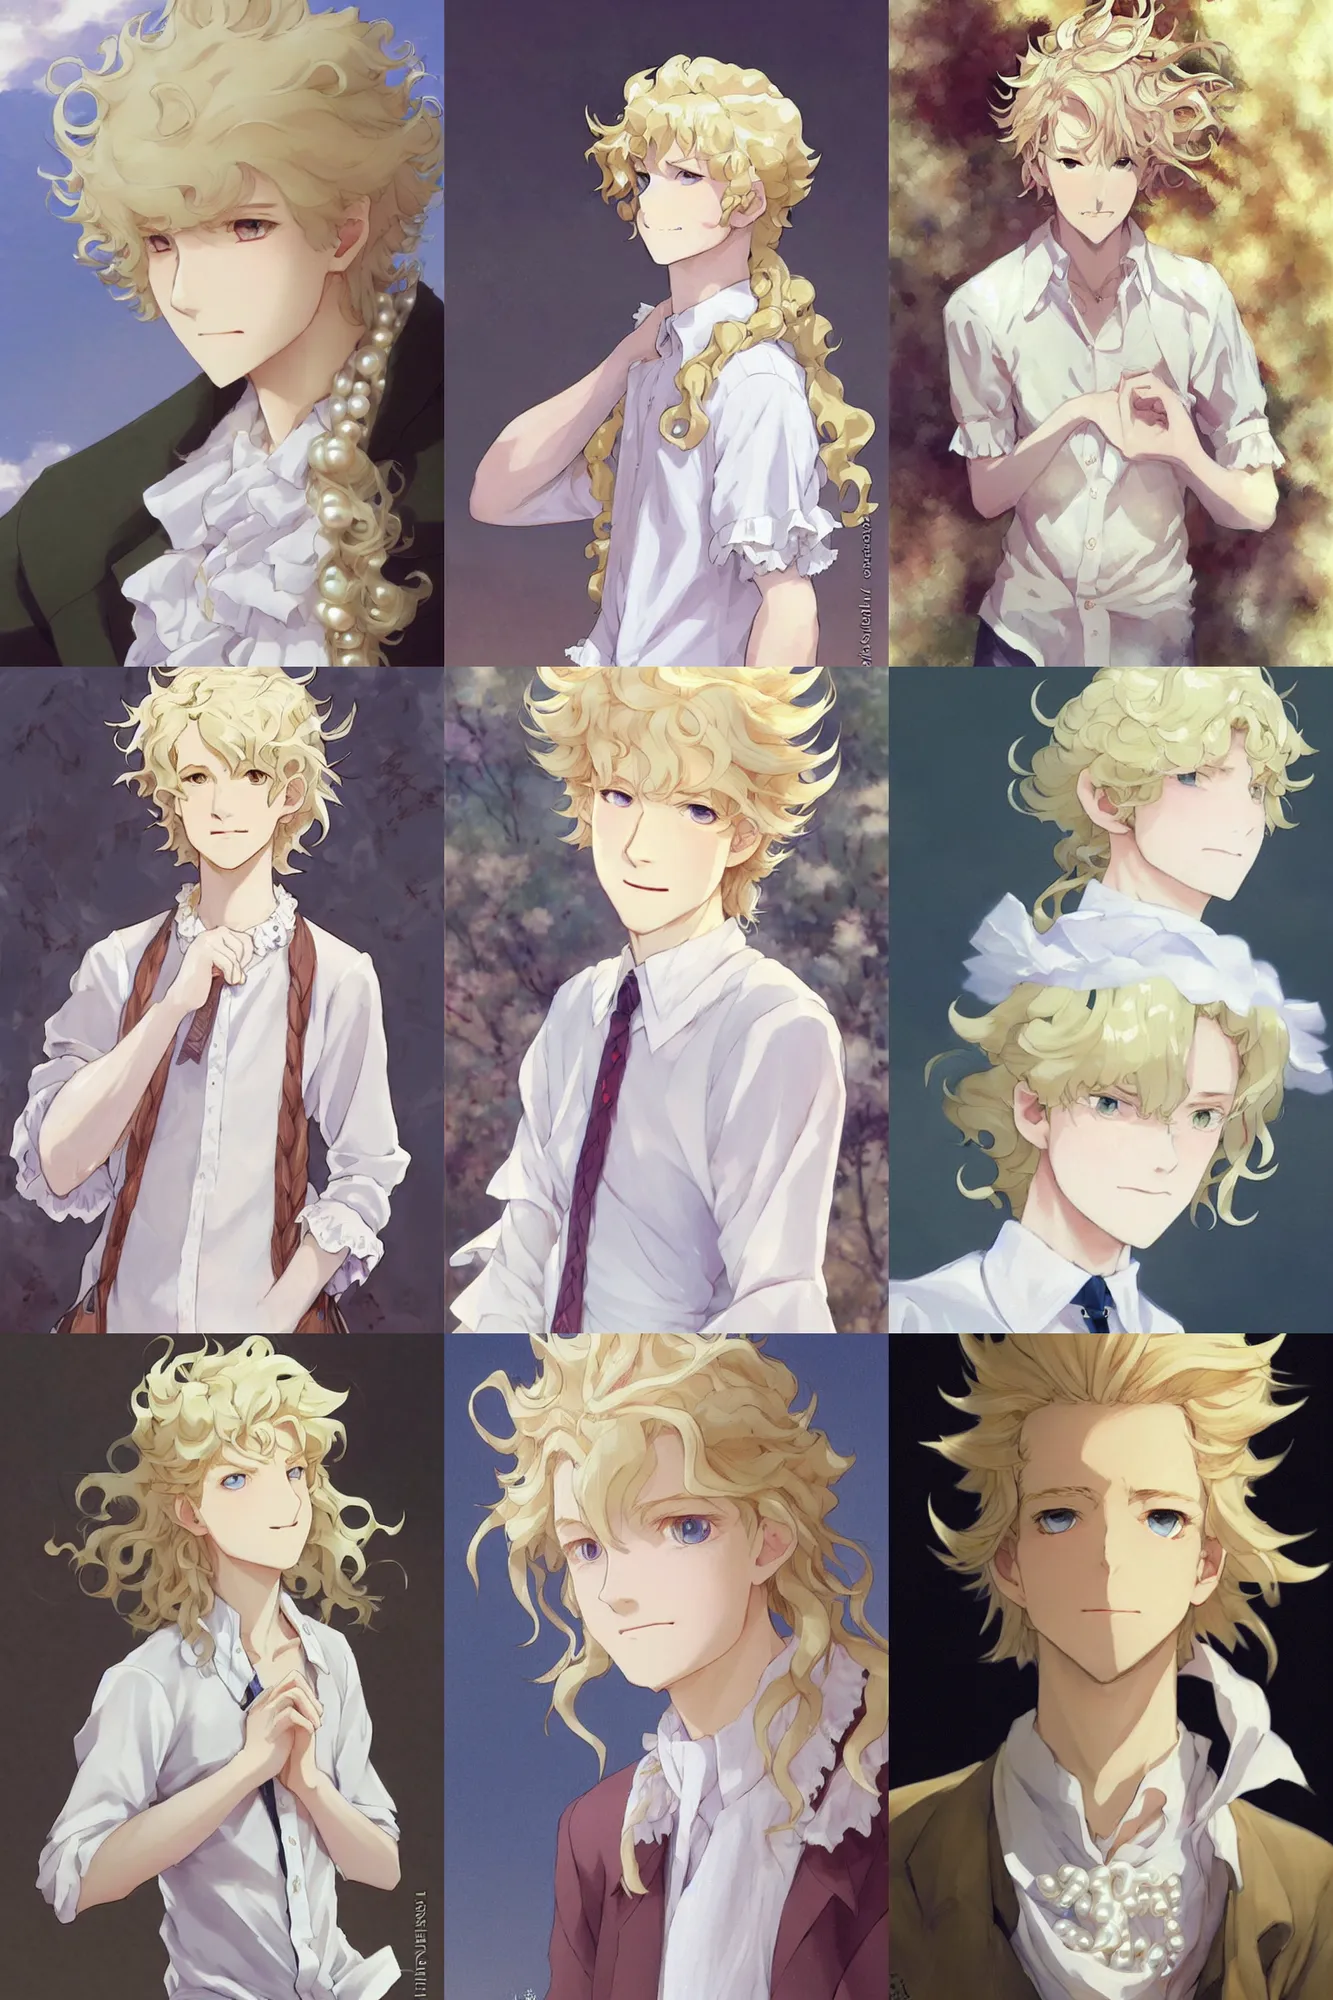 Prompt: Close-up a pale blond prince wearing a poet shirt with many frills and pearls, by krenz cushart and makoto shinkai. Long curly light blond hair. Very very very pale white skin and golden blond hair. Accurately shaped. A very clean image.